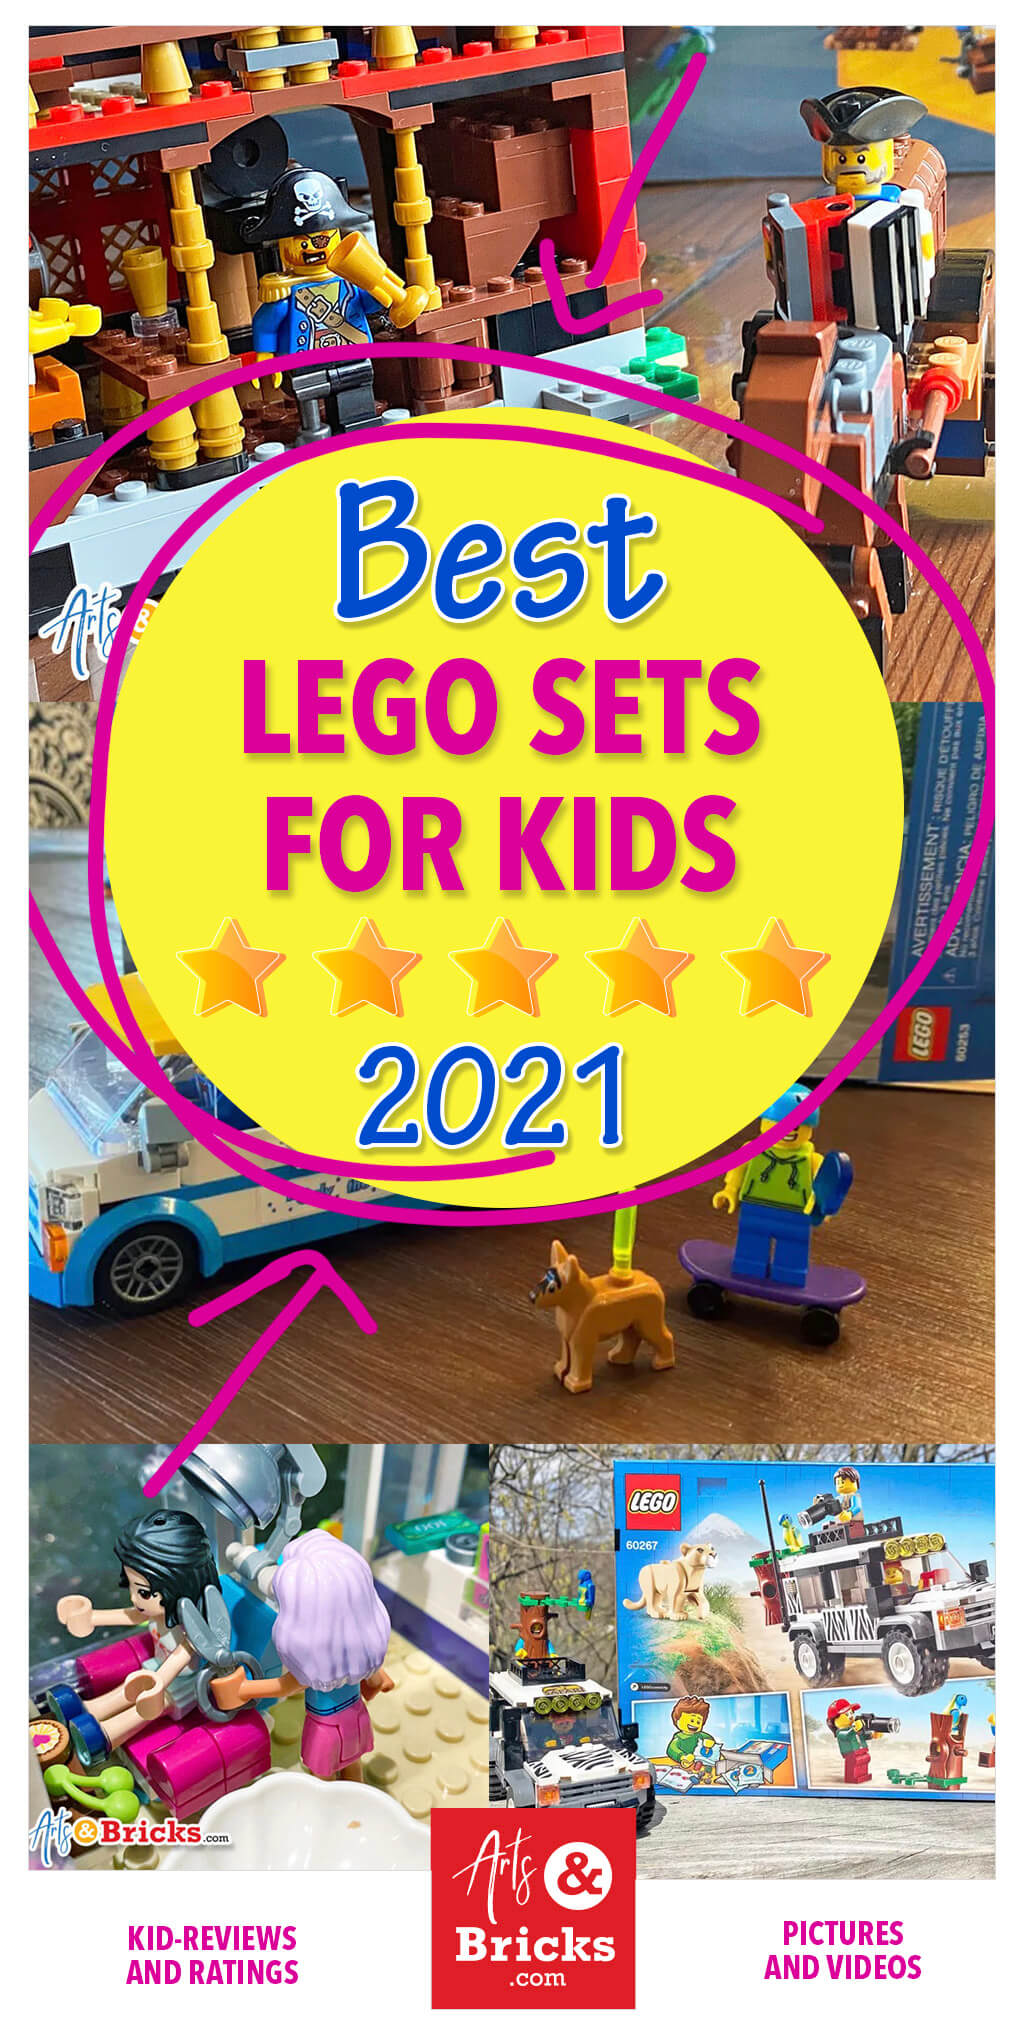 Explore our favorite LEGO sets for kids ages 5 to 12 available for purchase in 2021. Our kids have built these sets and adamantly recommend them!